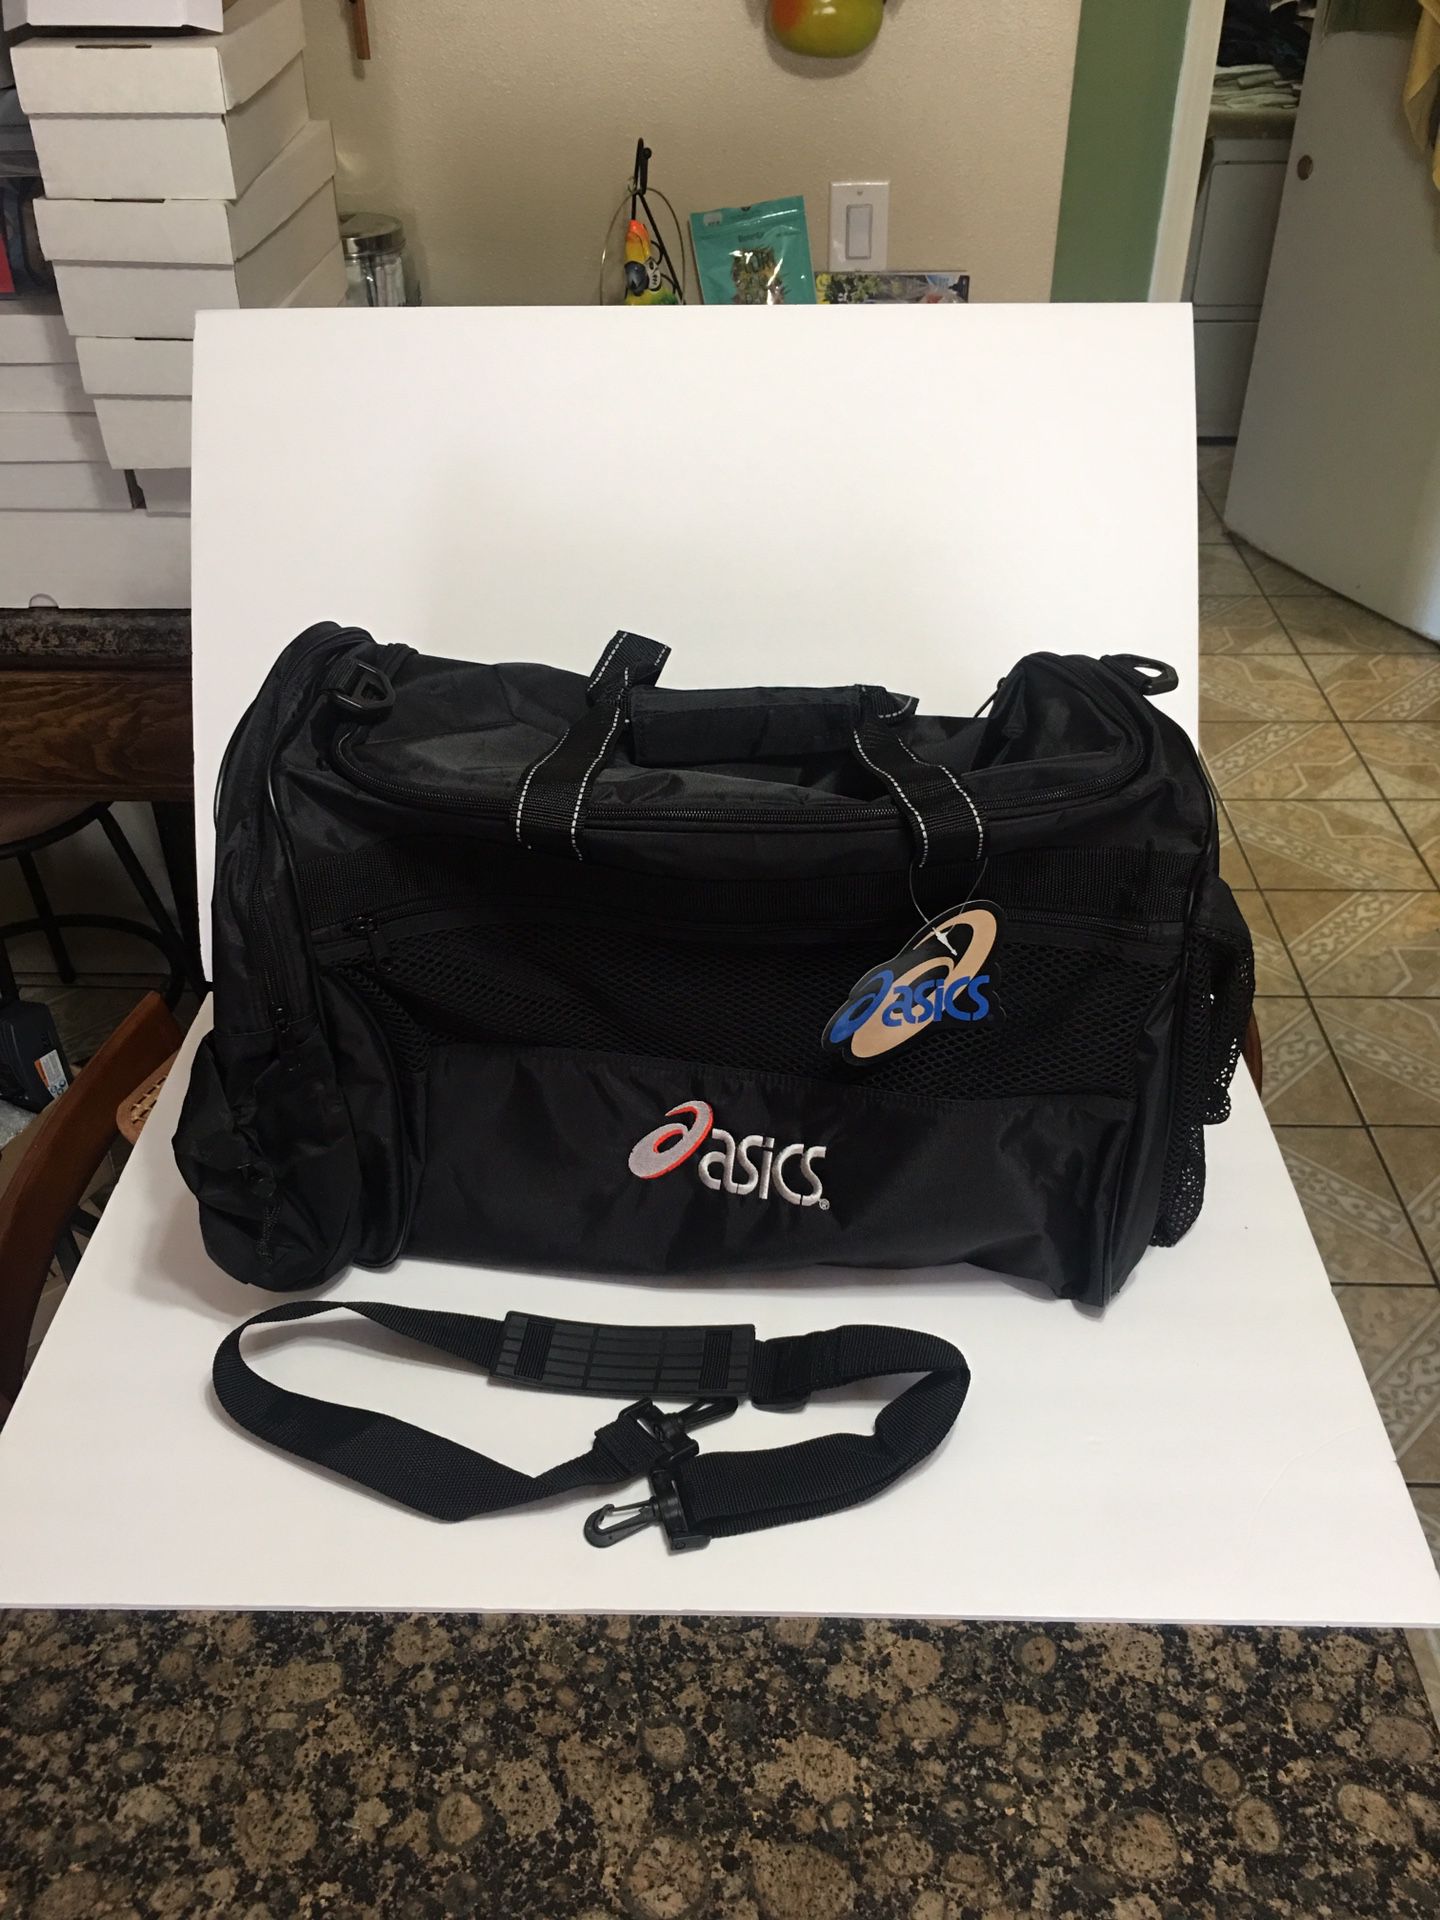 Asics Volleyball Duffle Bag NEW With Tags.